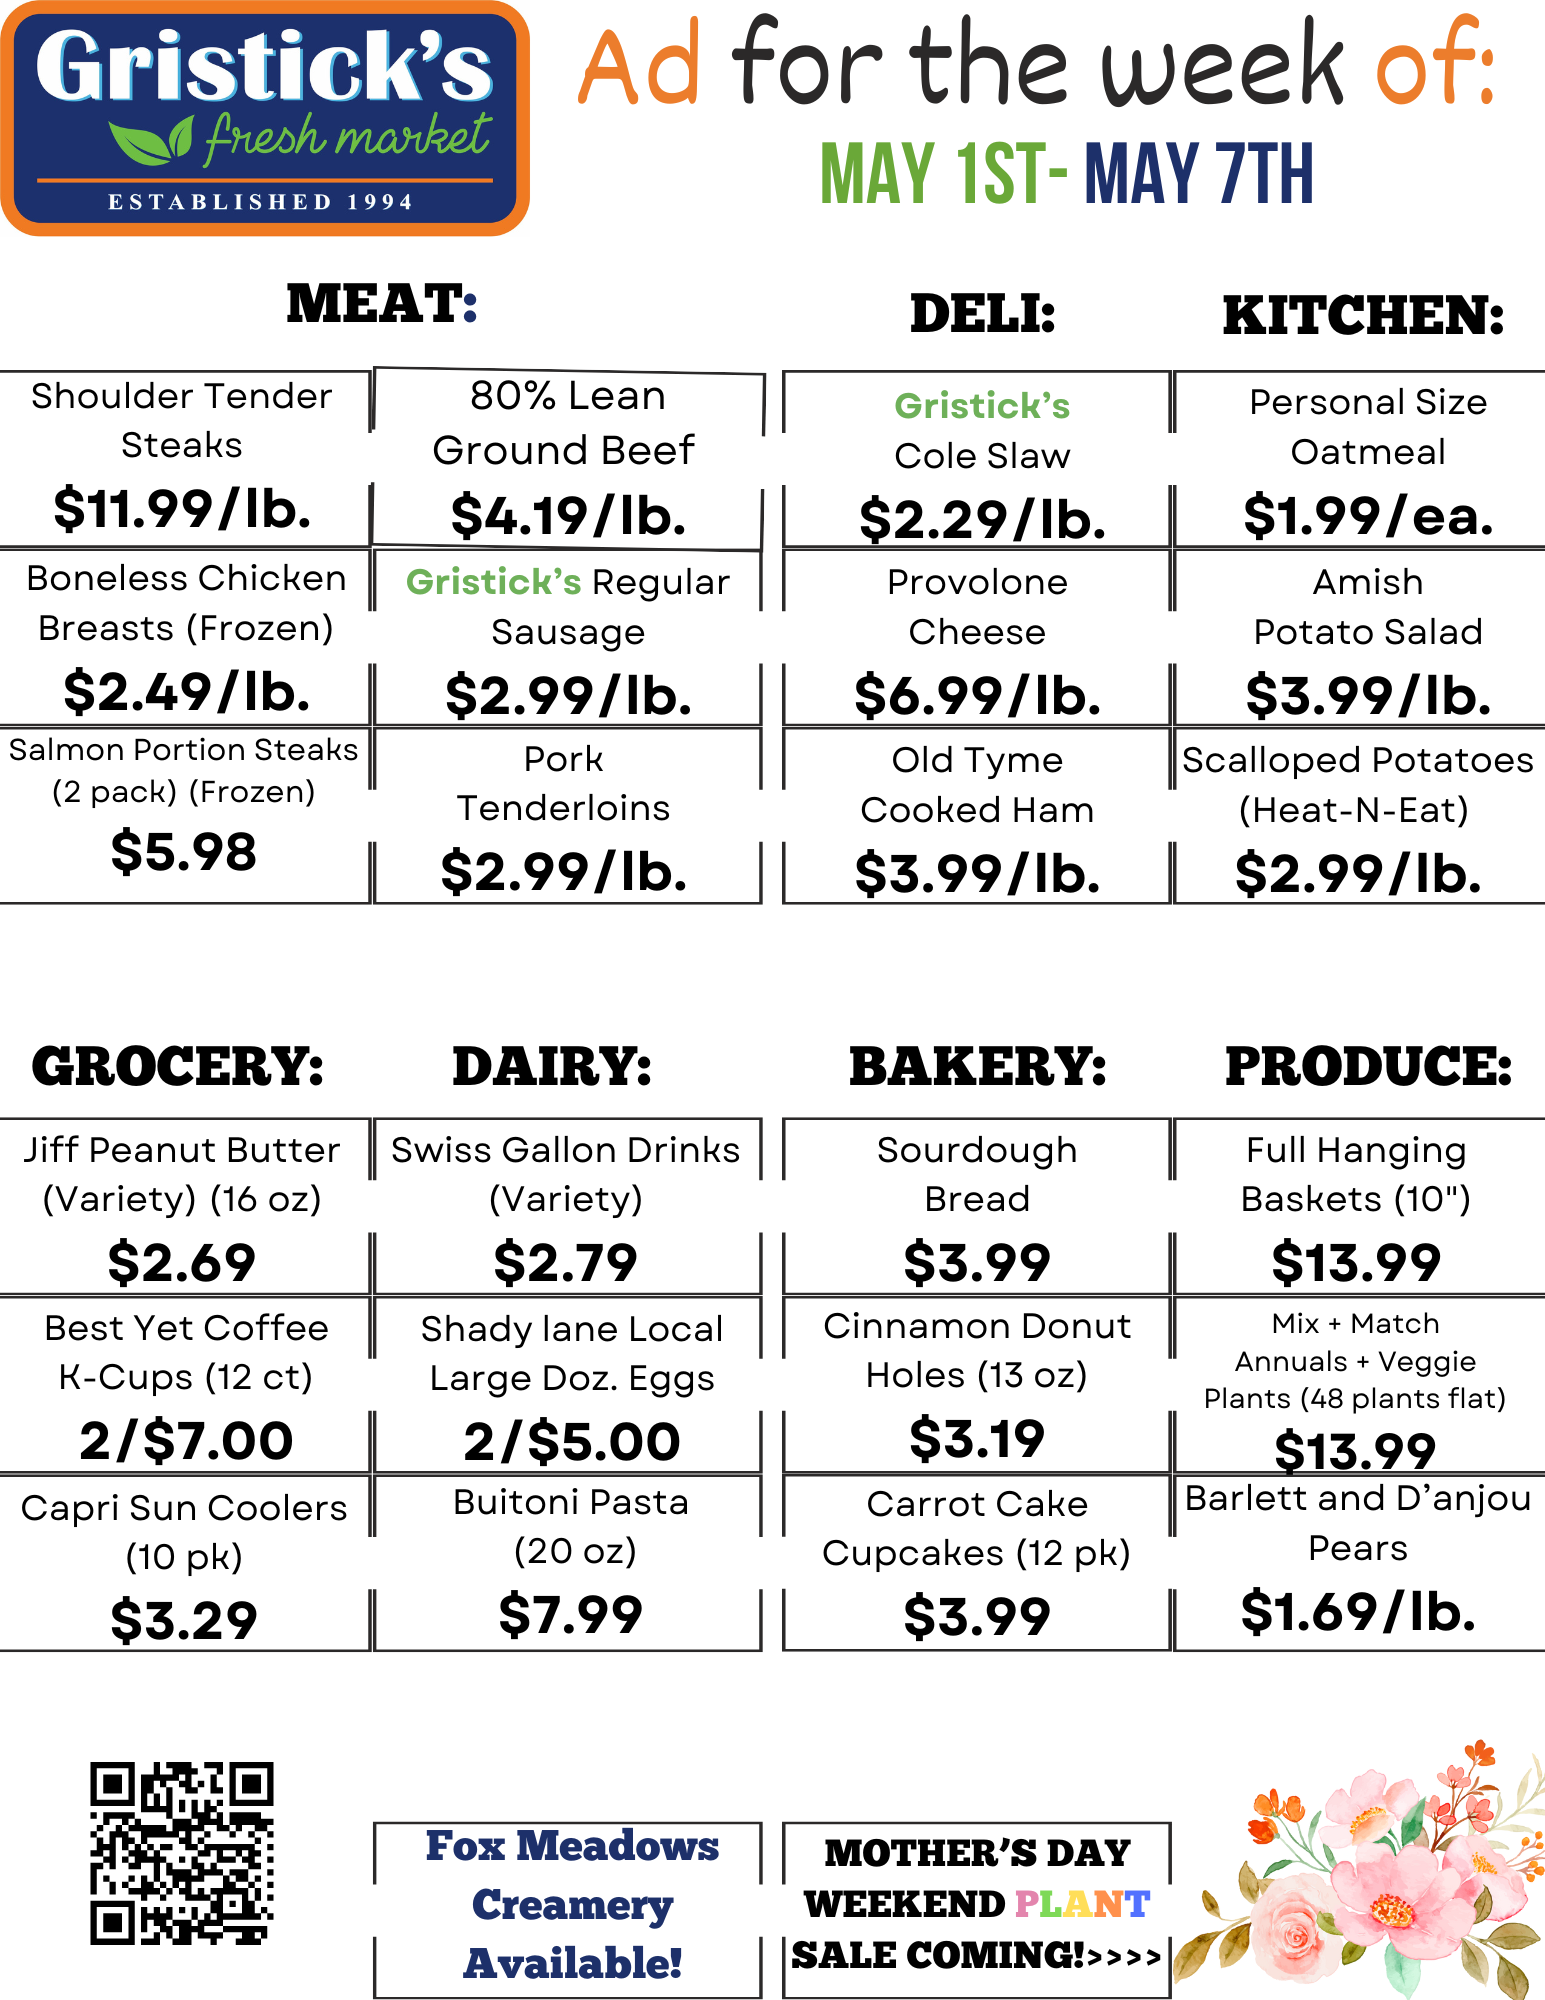 A grocery store ad for the week of may 1st - may 7th.